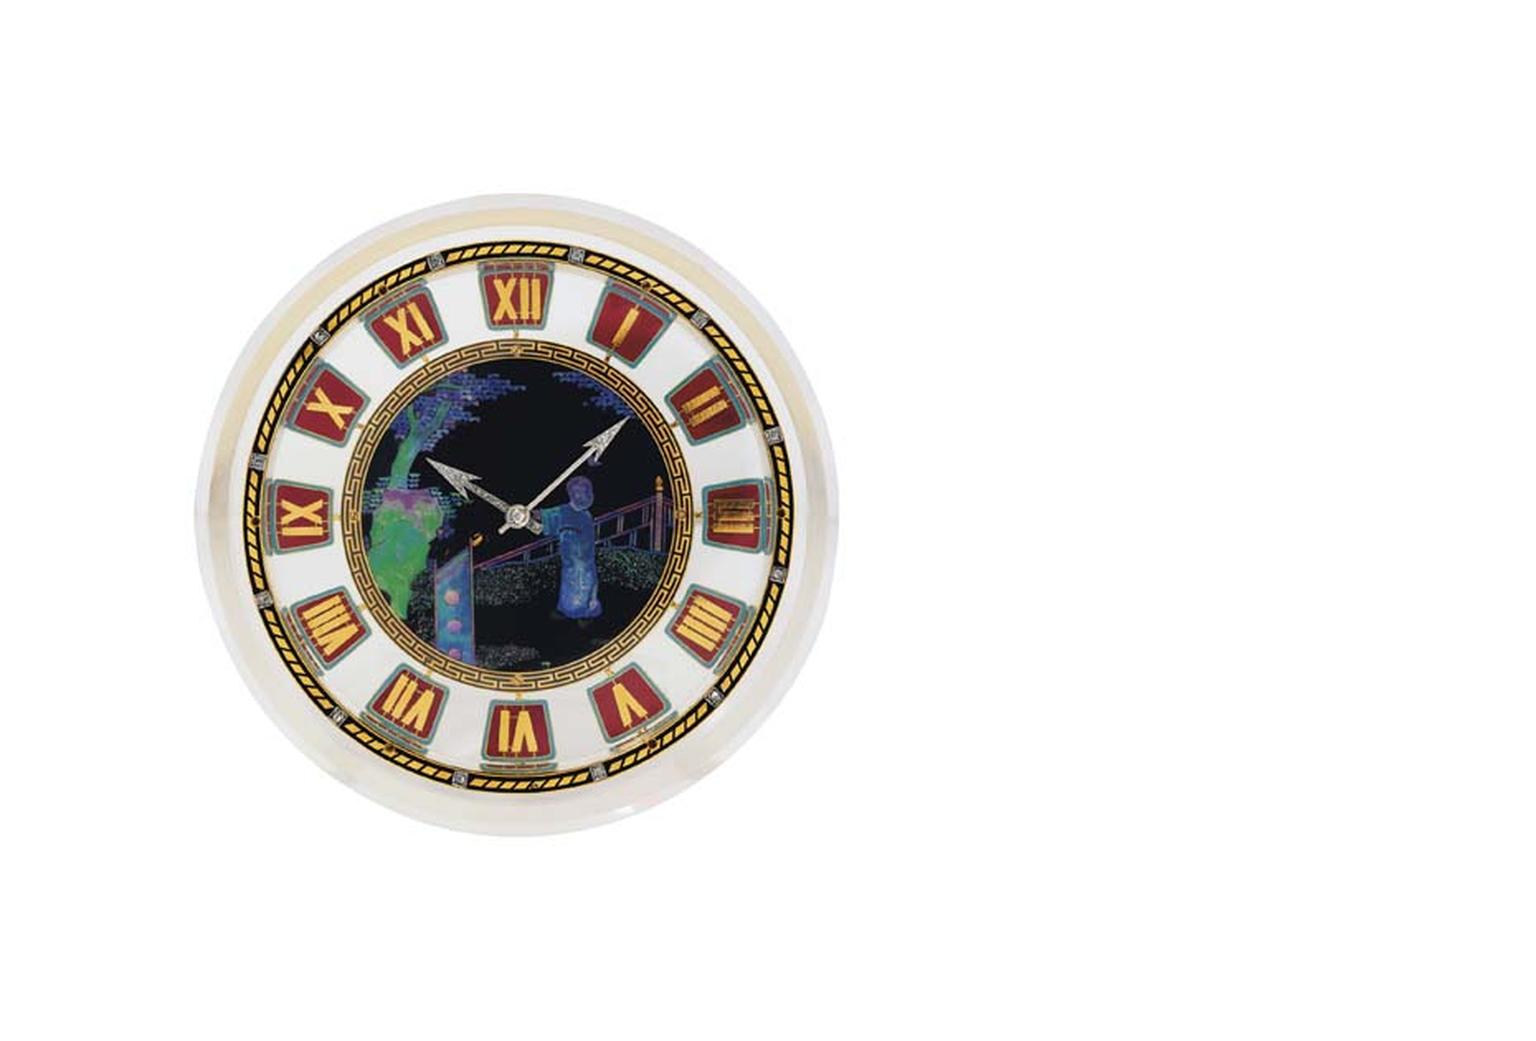 Christie's Lot 239 Cartier rock crystal, enamel, mother-of-pearl and diamond clock dating from circa 1925 (estimate: £40,000-60,000).